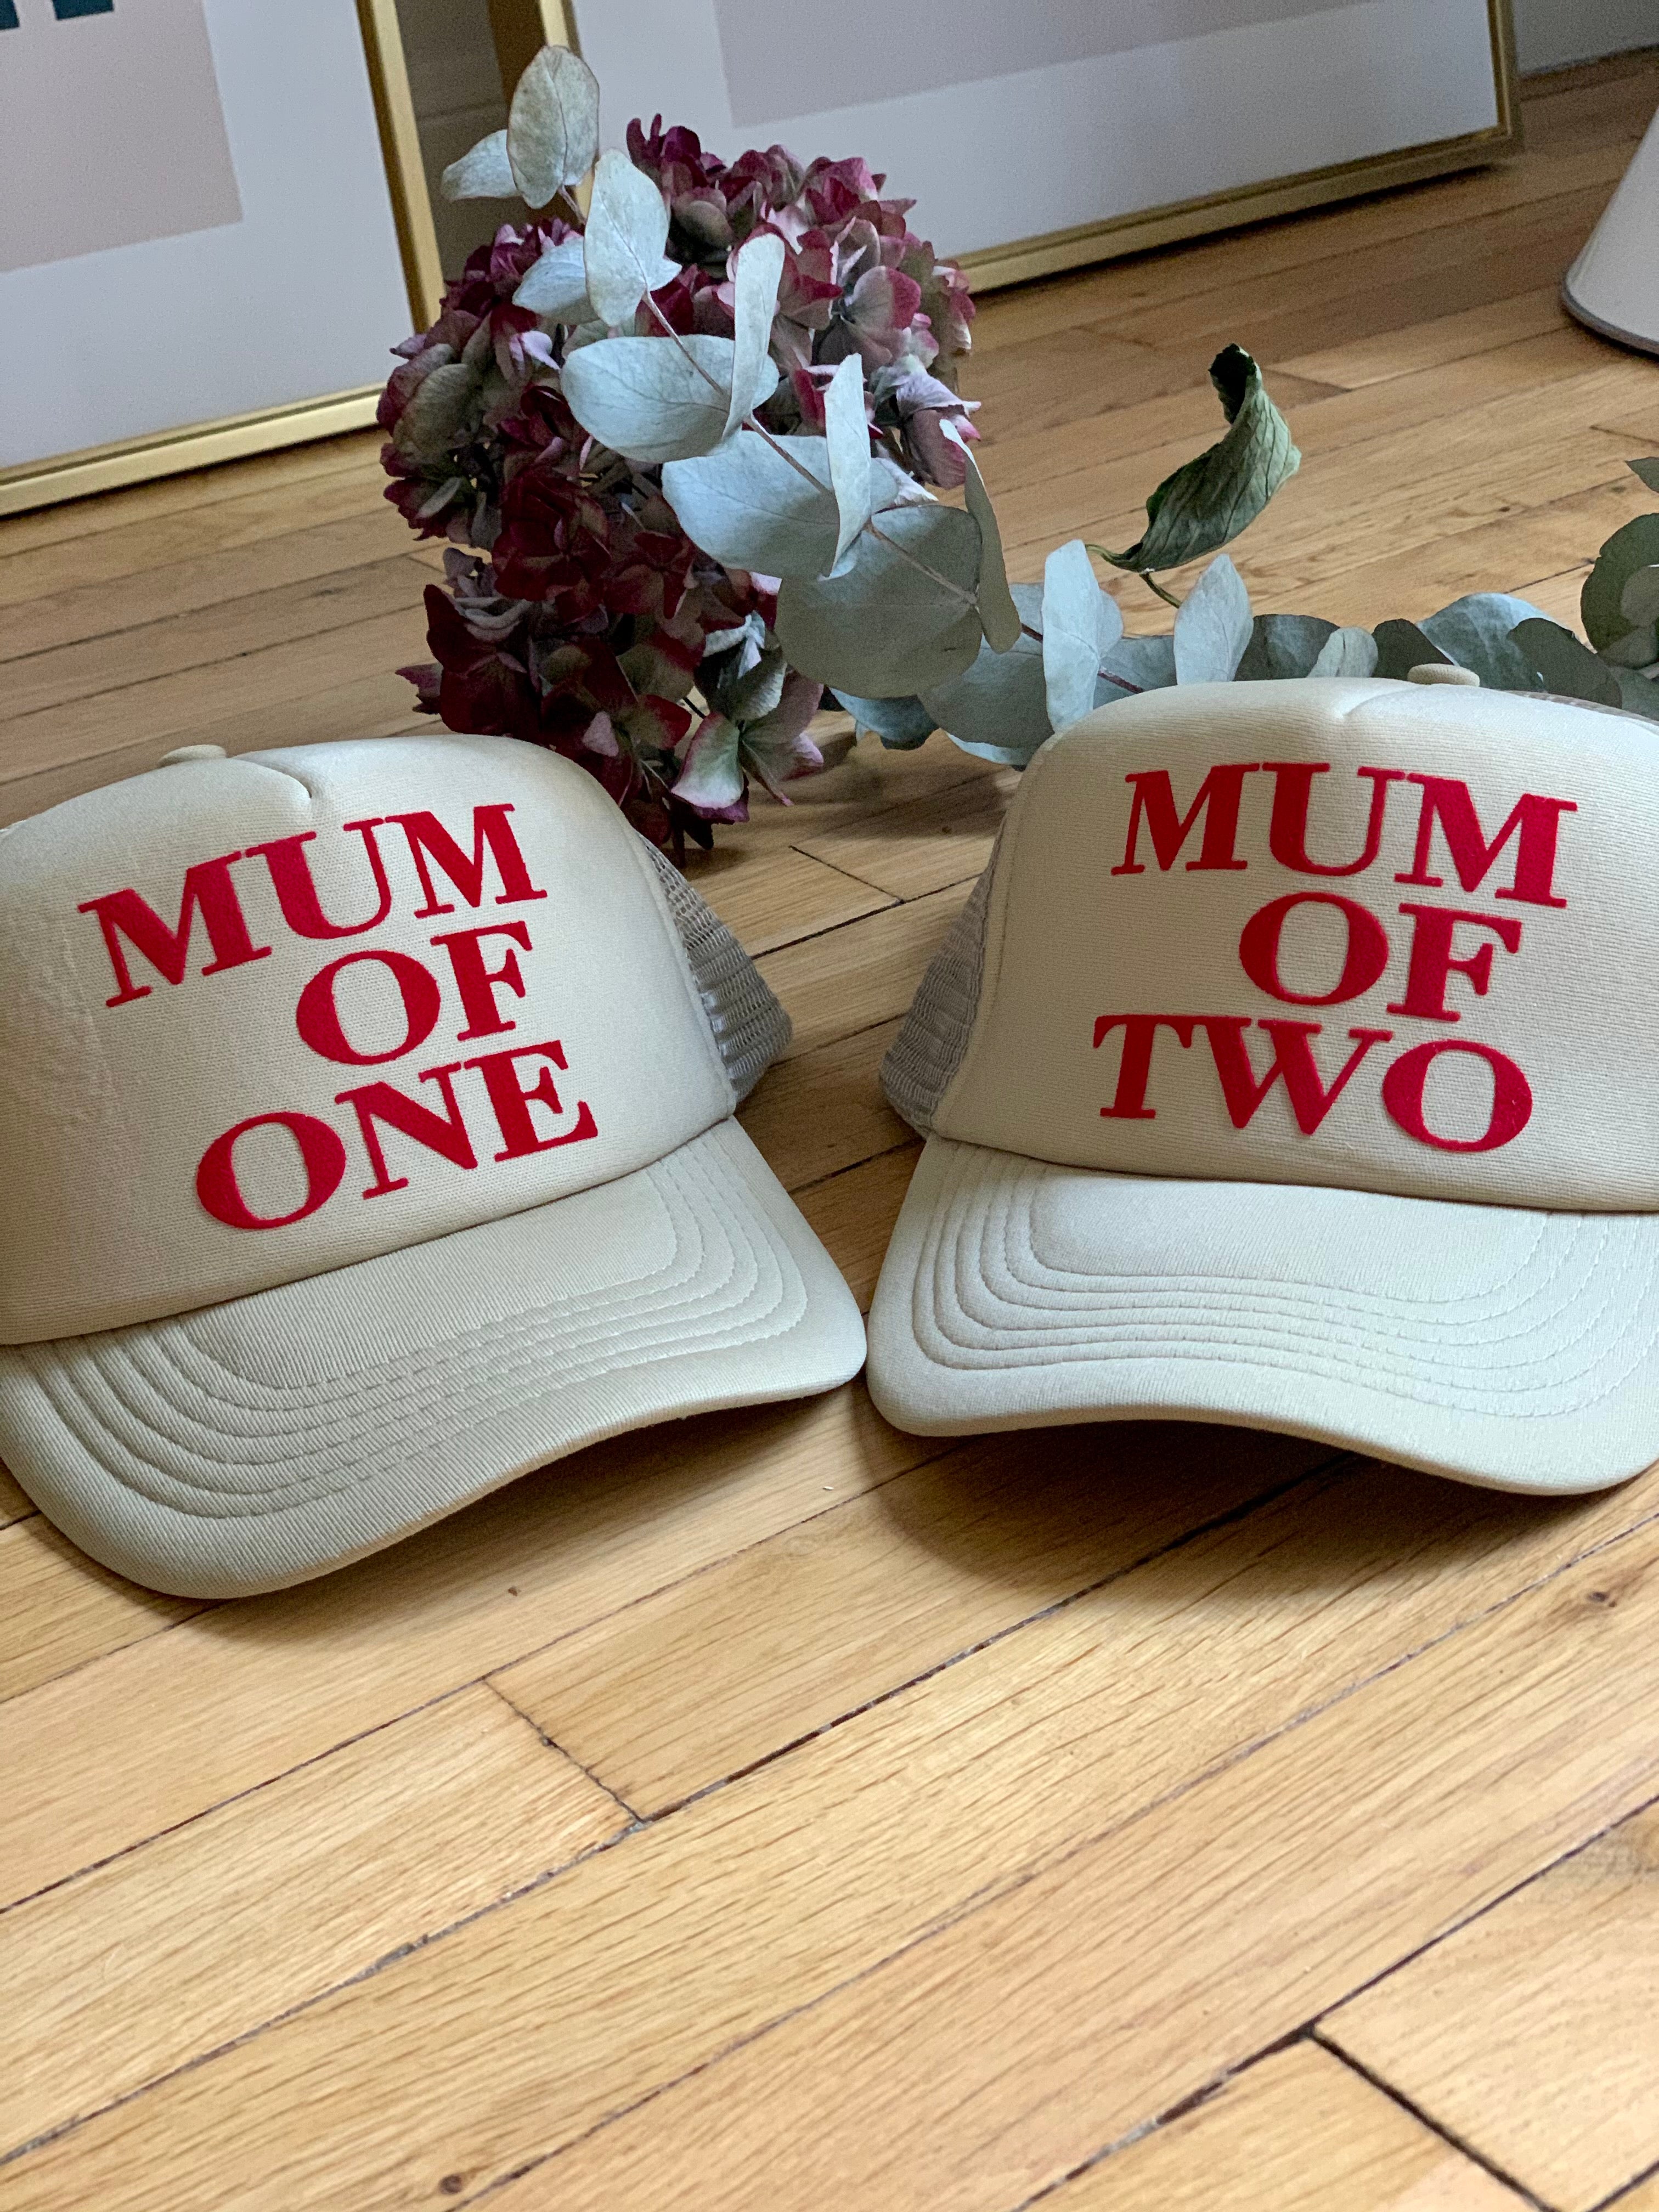 CASQUETTE MUM OF - SABLE - Disponibles pour les MUM OF ONE, TWO, THREE...